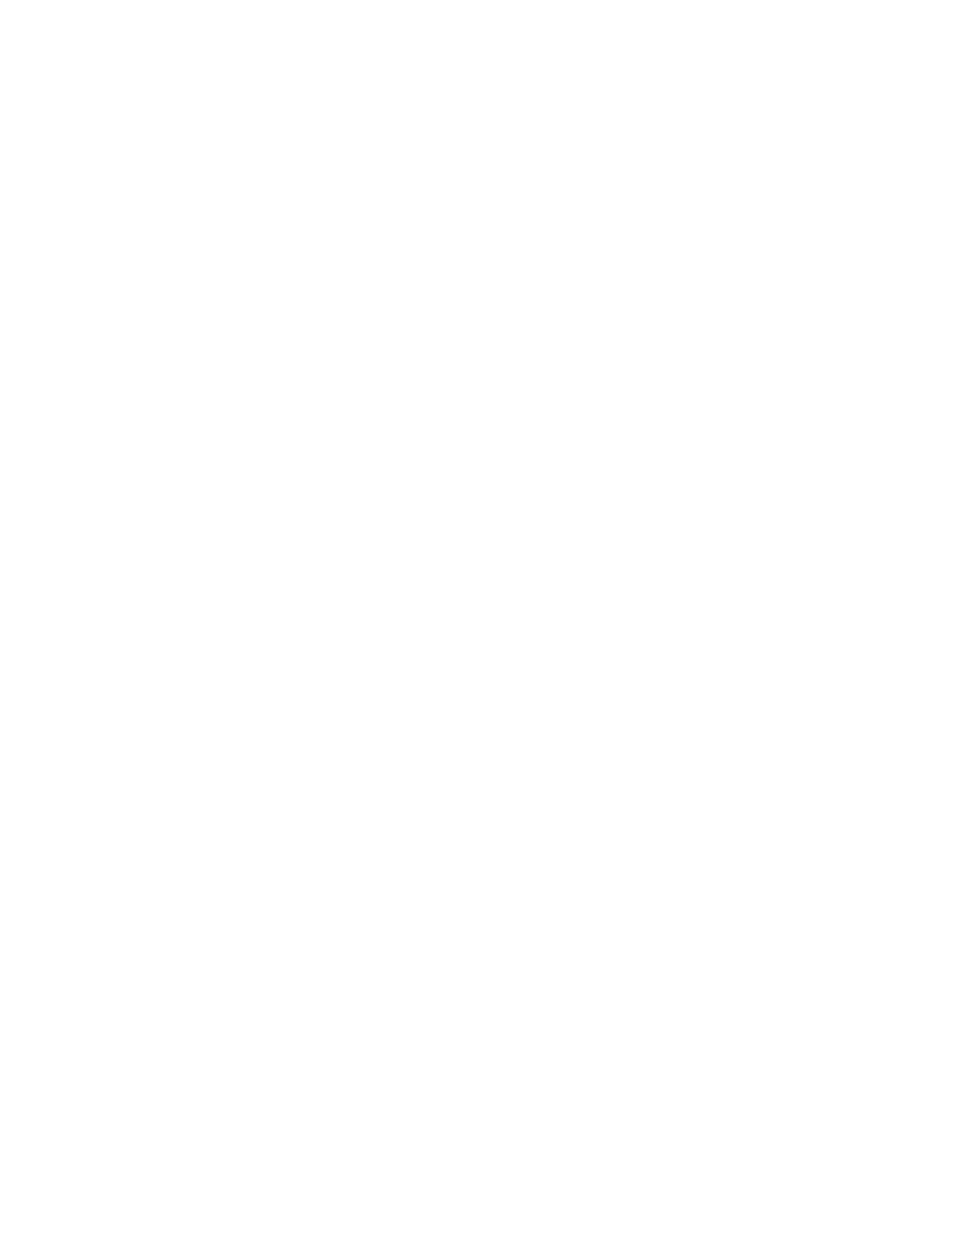 Light Gradient Black and White From Center Transparent PNG